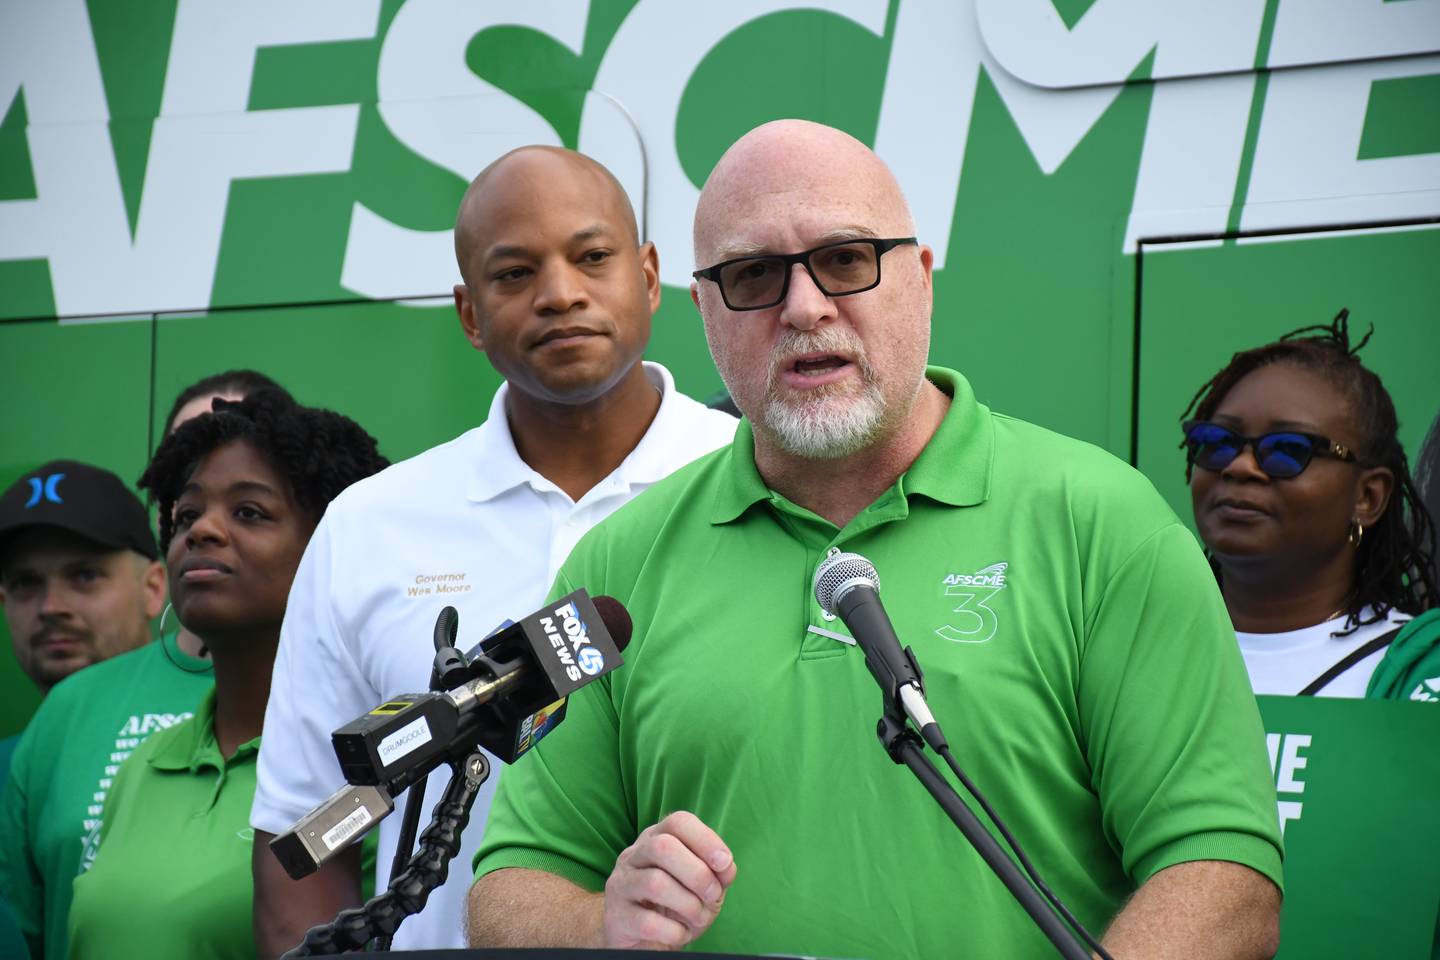 Patrick Moran, president of AFSCME Maryland Council 3, speaks at a "staff the front lines" event with members of the AFSCME union outside the union building in southwest Baltimore on Saturday, Sept. 9, 2023. Behind him is Gov. Wes Moore.